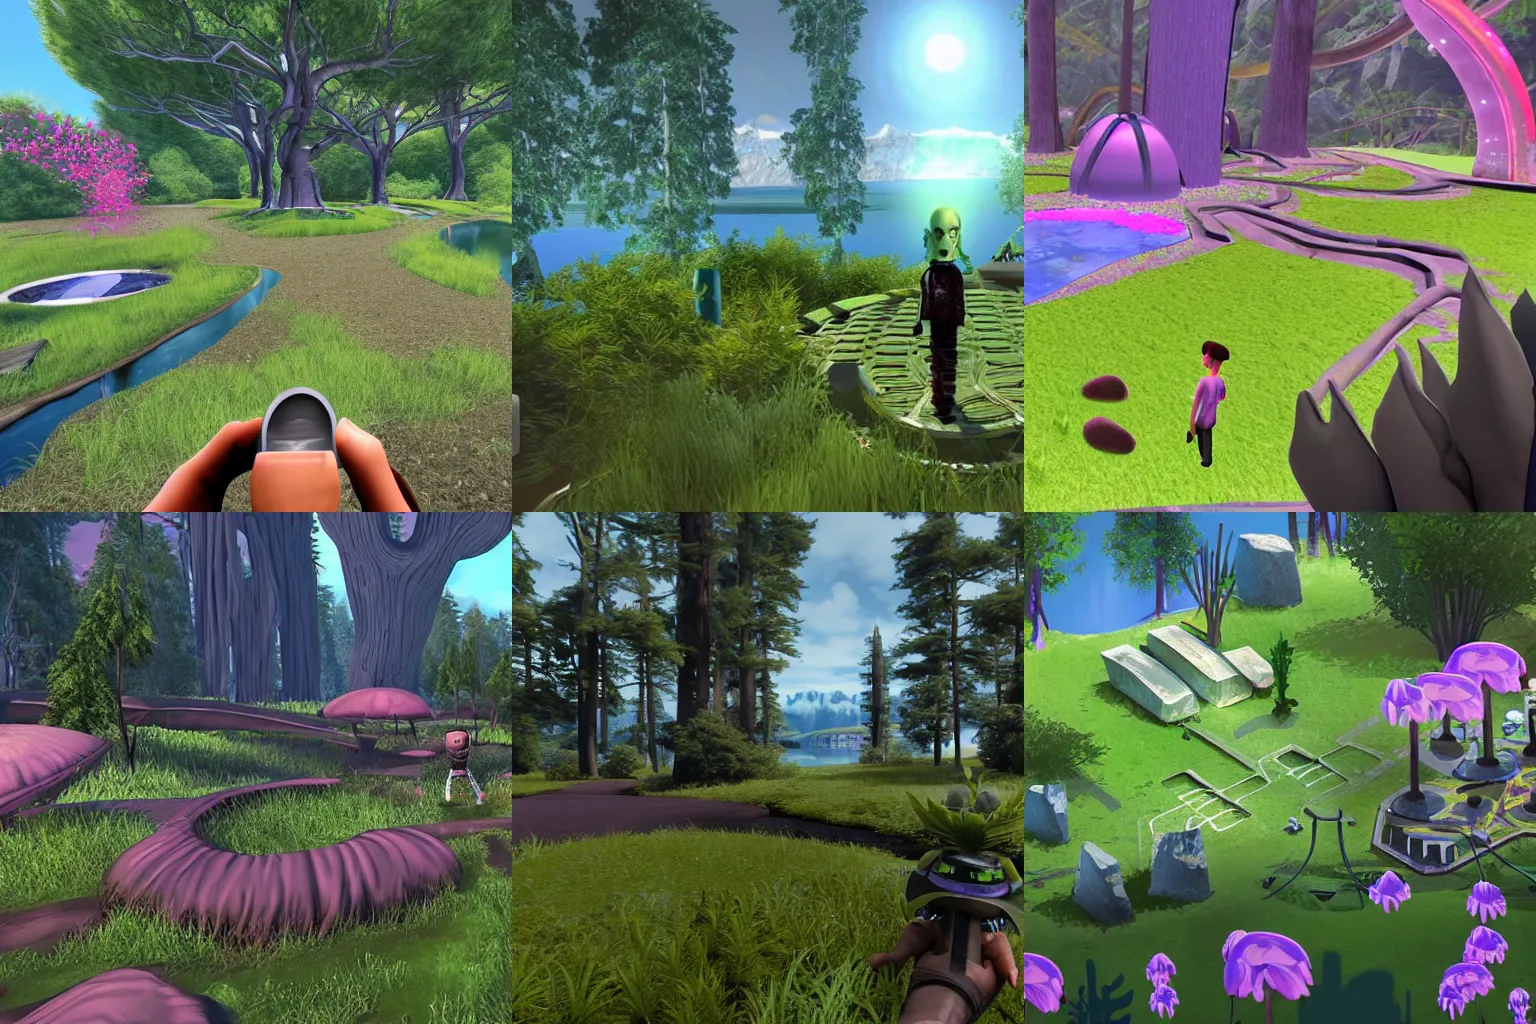 Prompt: third person view, in a park and next to a lake, in a small town on an alien planet, with strange alien plants and flowers, no people, from a space themed Serria point and click 2D graphic adventure game, made in 2019, high quality graphics